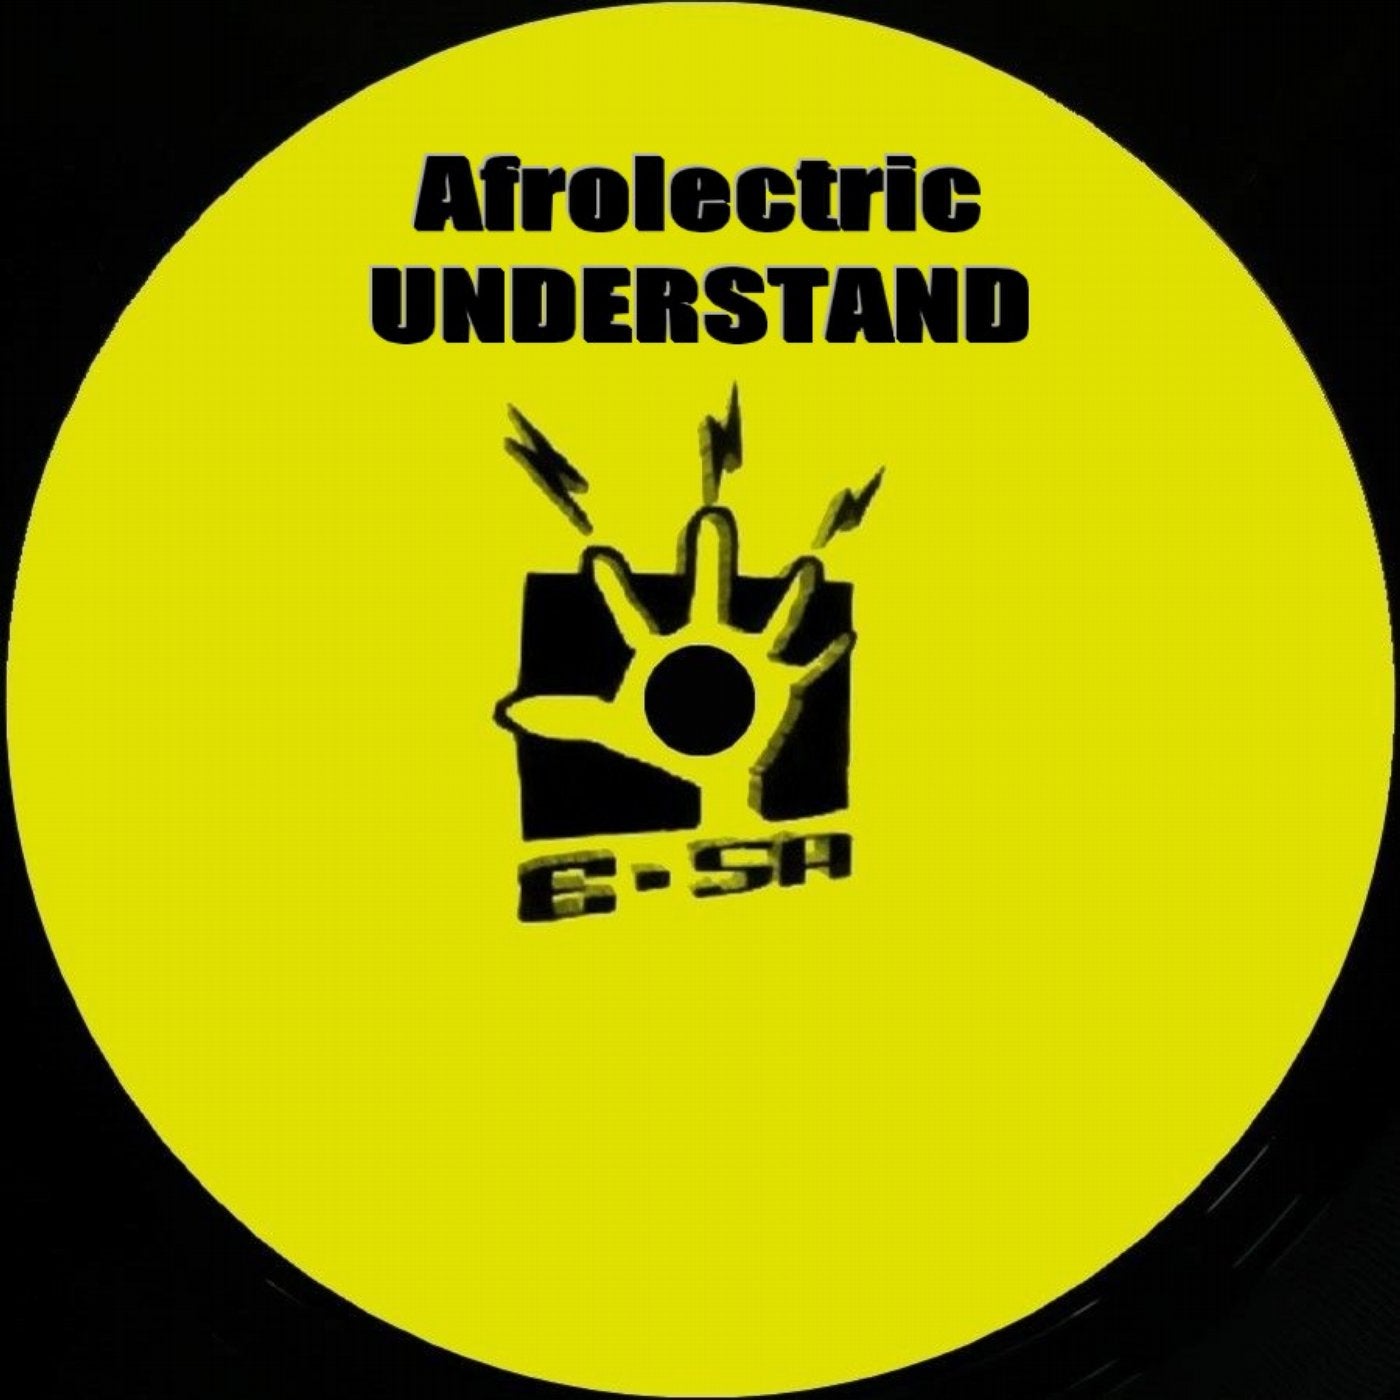 Afrolectric